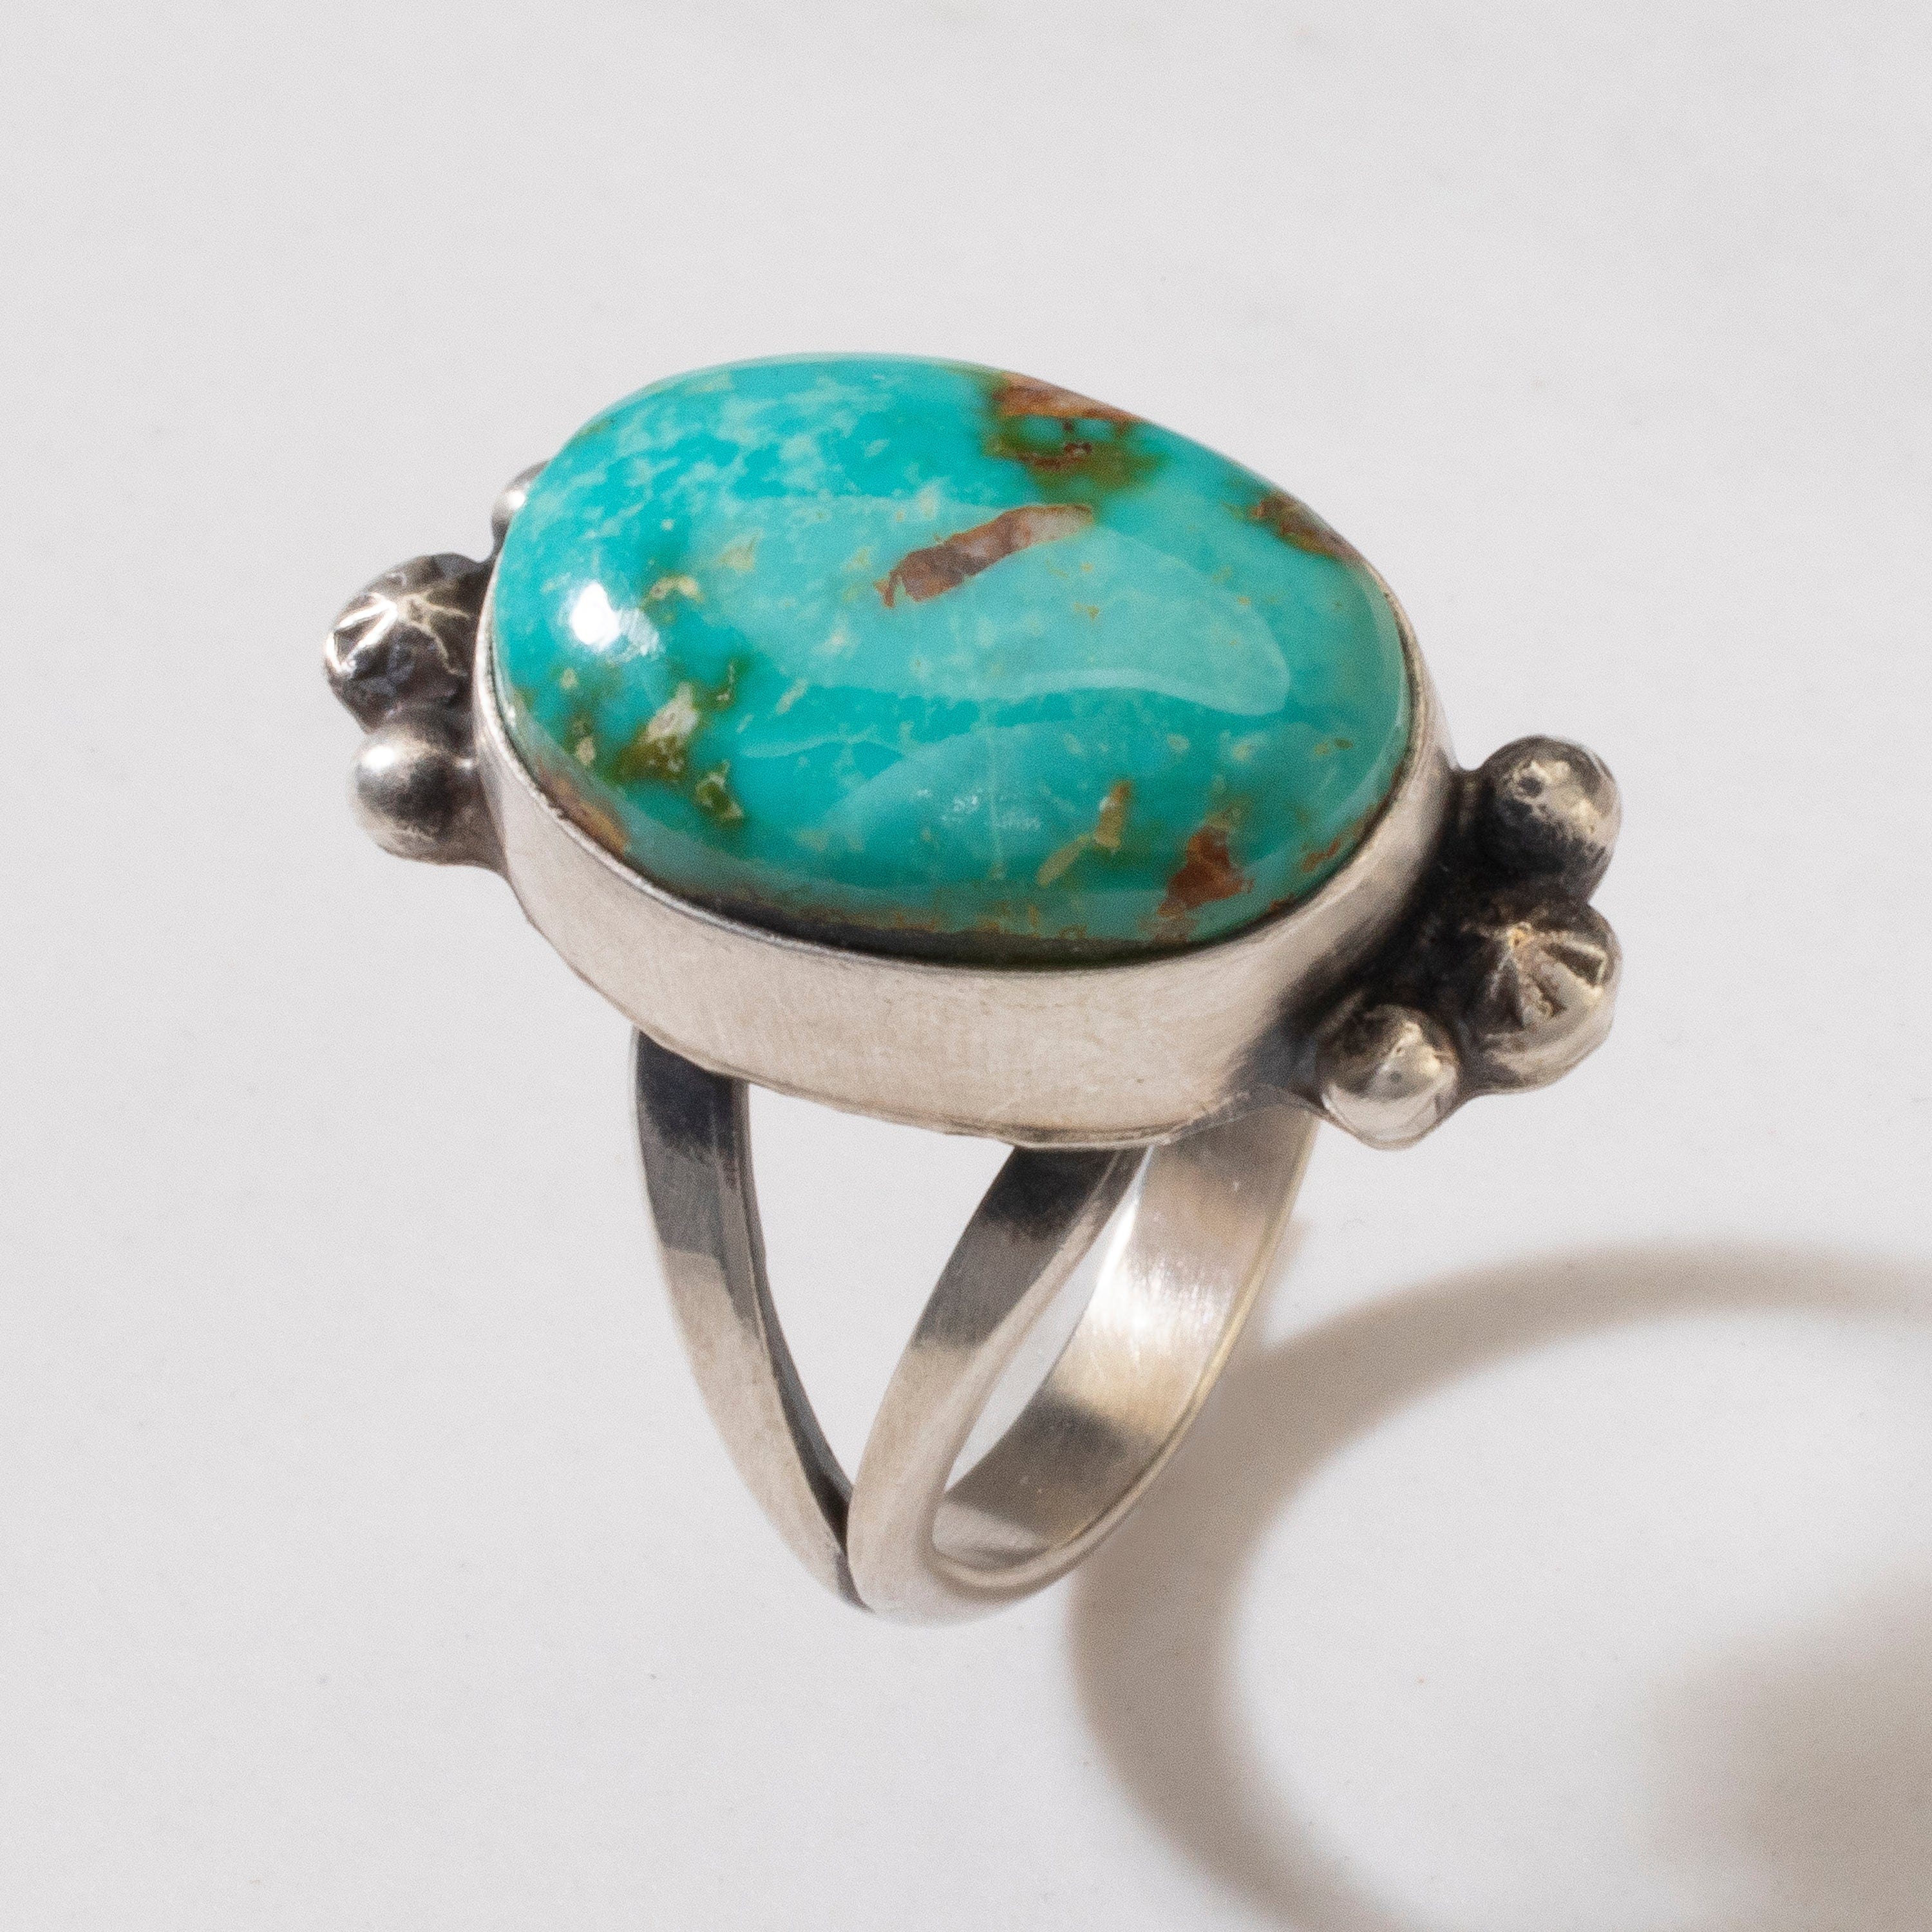 Kalifano Native American Jewelry 7 Scott Skeets Royston Turquoise Navajo USA Native American Made 925 Sterling Silver Ring NAR600.070.7